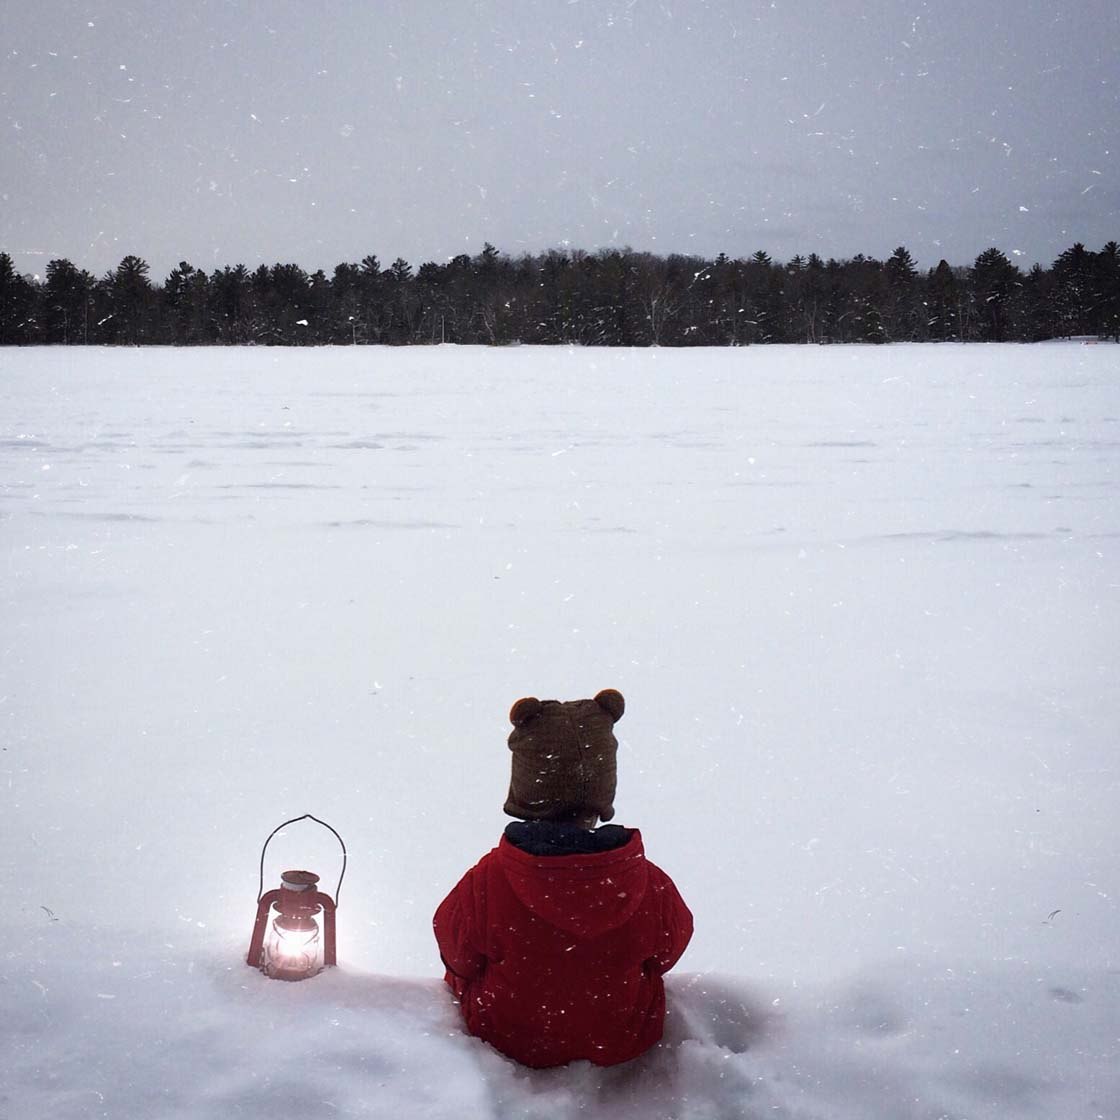 10 Tips For Shooting Wonderful Winter Snow Photos On iPhone